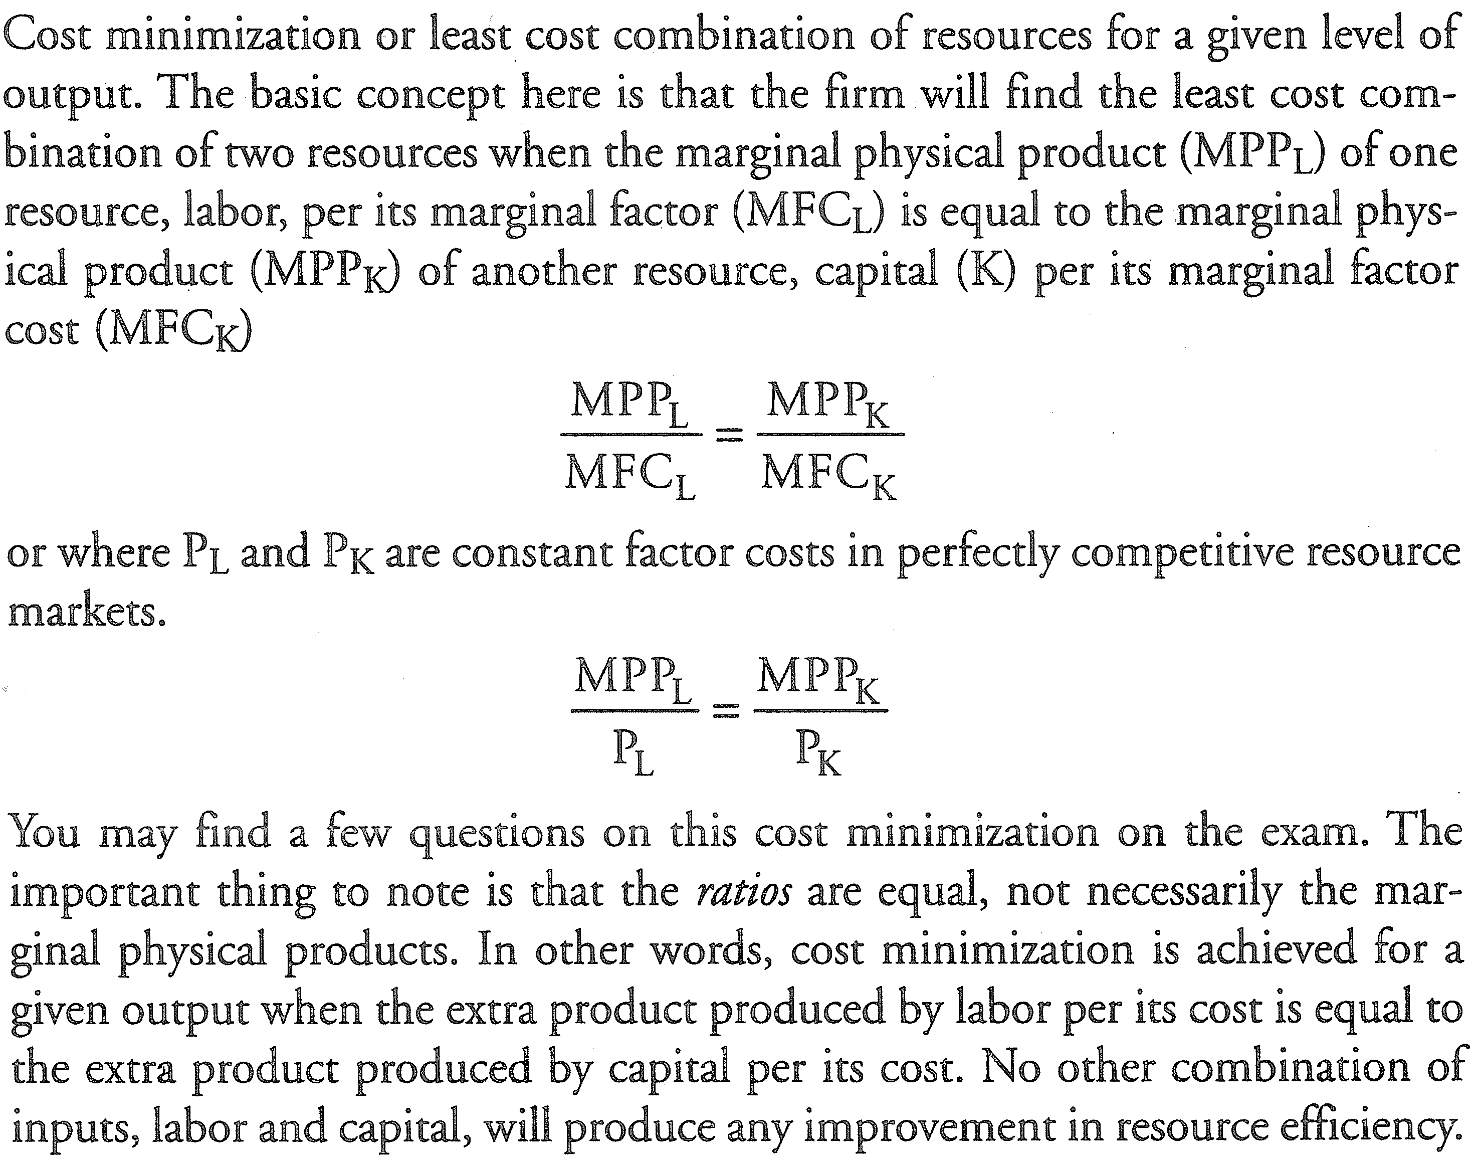 Machine generated alternative text: Cost minimization or least COSt
  combination Of resources for a give n I eve 1 Of output The basic
  concept here is that the firm will find the least cost com- bination
  of 0 resources when the marginal physical product (MPPL) of one
  resource, labor, per its marginal factor (MFCL) is equal to the
  marginal phys- ical product (MPPK) of another resource, capital （ K)
  per marginal factor cost (MFCK) MPPL MPPK MFCL MFCK or where PL an d
  PK a re constant factor COStS in perfectly competitive resource
  marketso MPPL MPPK You may find a few questions on this cost
  minimization on the exam 。 The important thing to note is that the 仍
  are equal, not necessarily the mar- ginal physical products, In Other
  WO rds ， cost minimization is ach i eve d for a give n output when the
  extra product produced by labor per its cost is equal to the ext r a
  product produced by capital per its cost. NO Other combination Of
  inputs, labor and capital, Will produce any improvement in resource
  efficiency. 